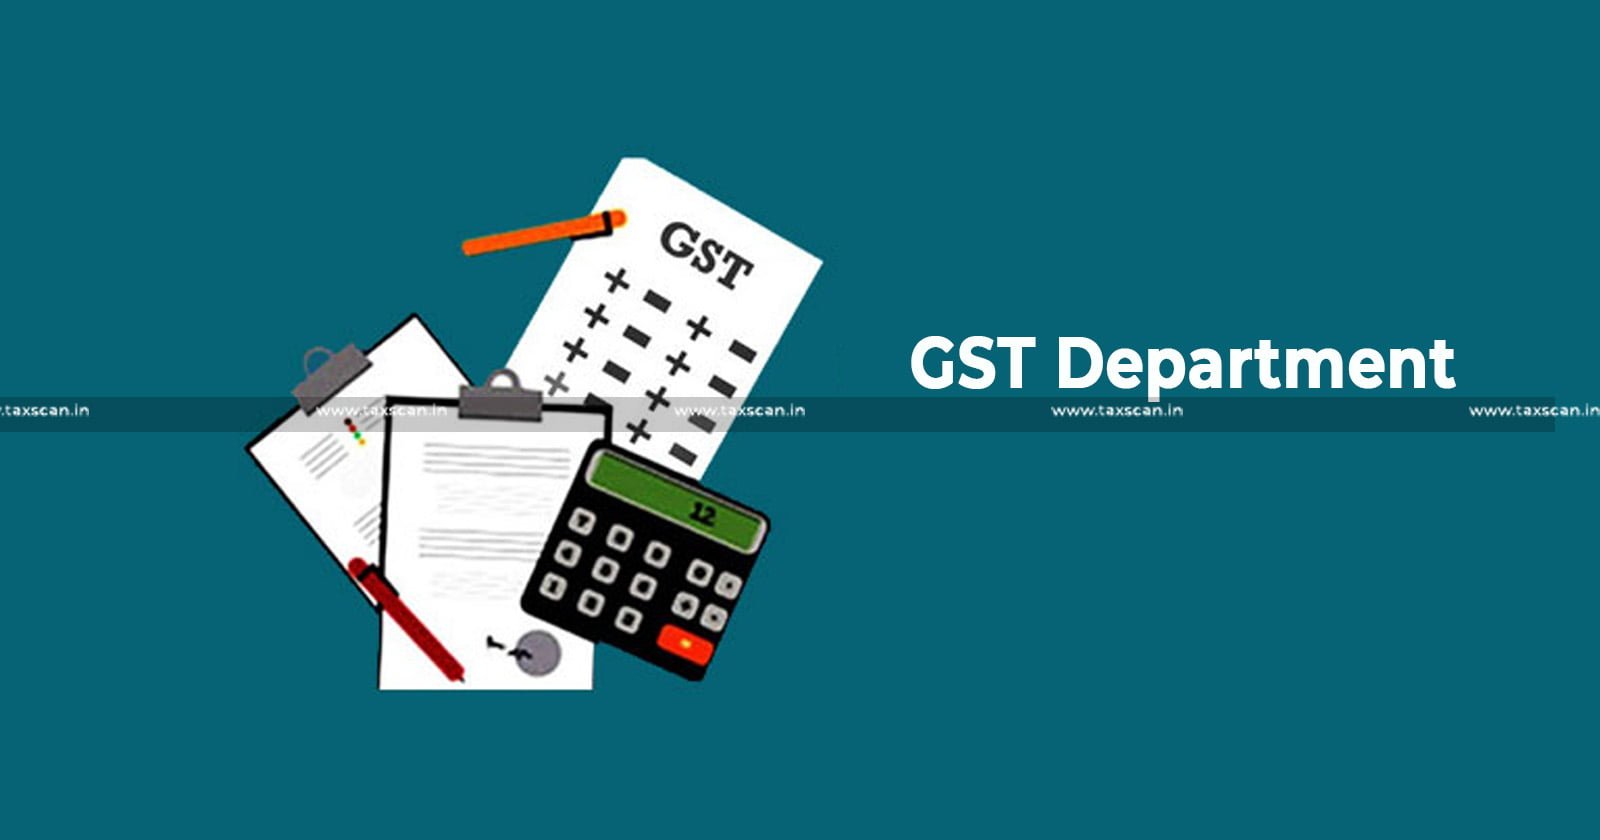 Punjab and Haryana High Court - GST Department - GST Department to Refund - Refund - Punjab and Haryana HC directs GST Department to Refund Amount - Refund Amount - DRC03 - SCN issued - Goods and Service Tax - taxscan